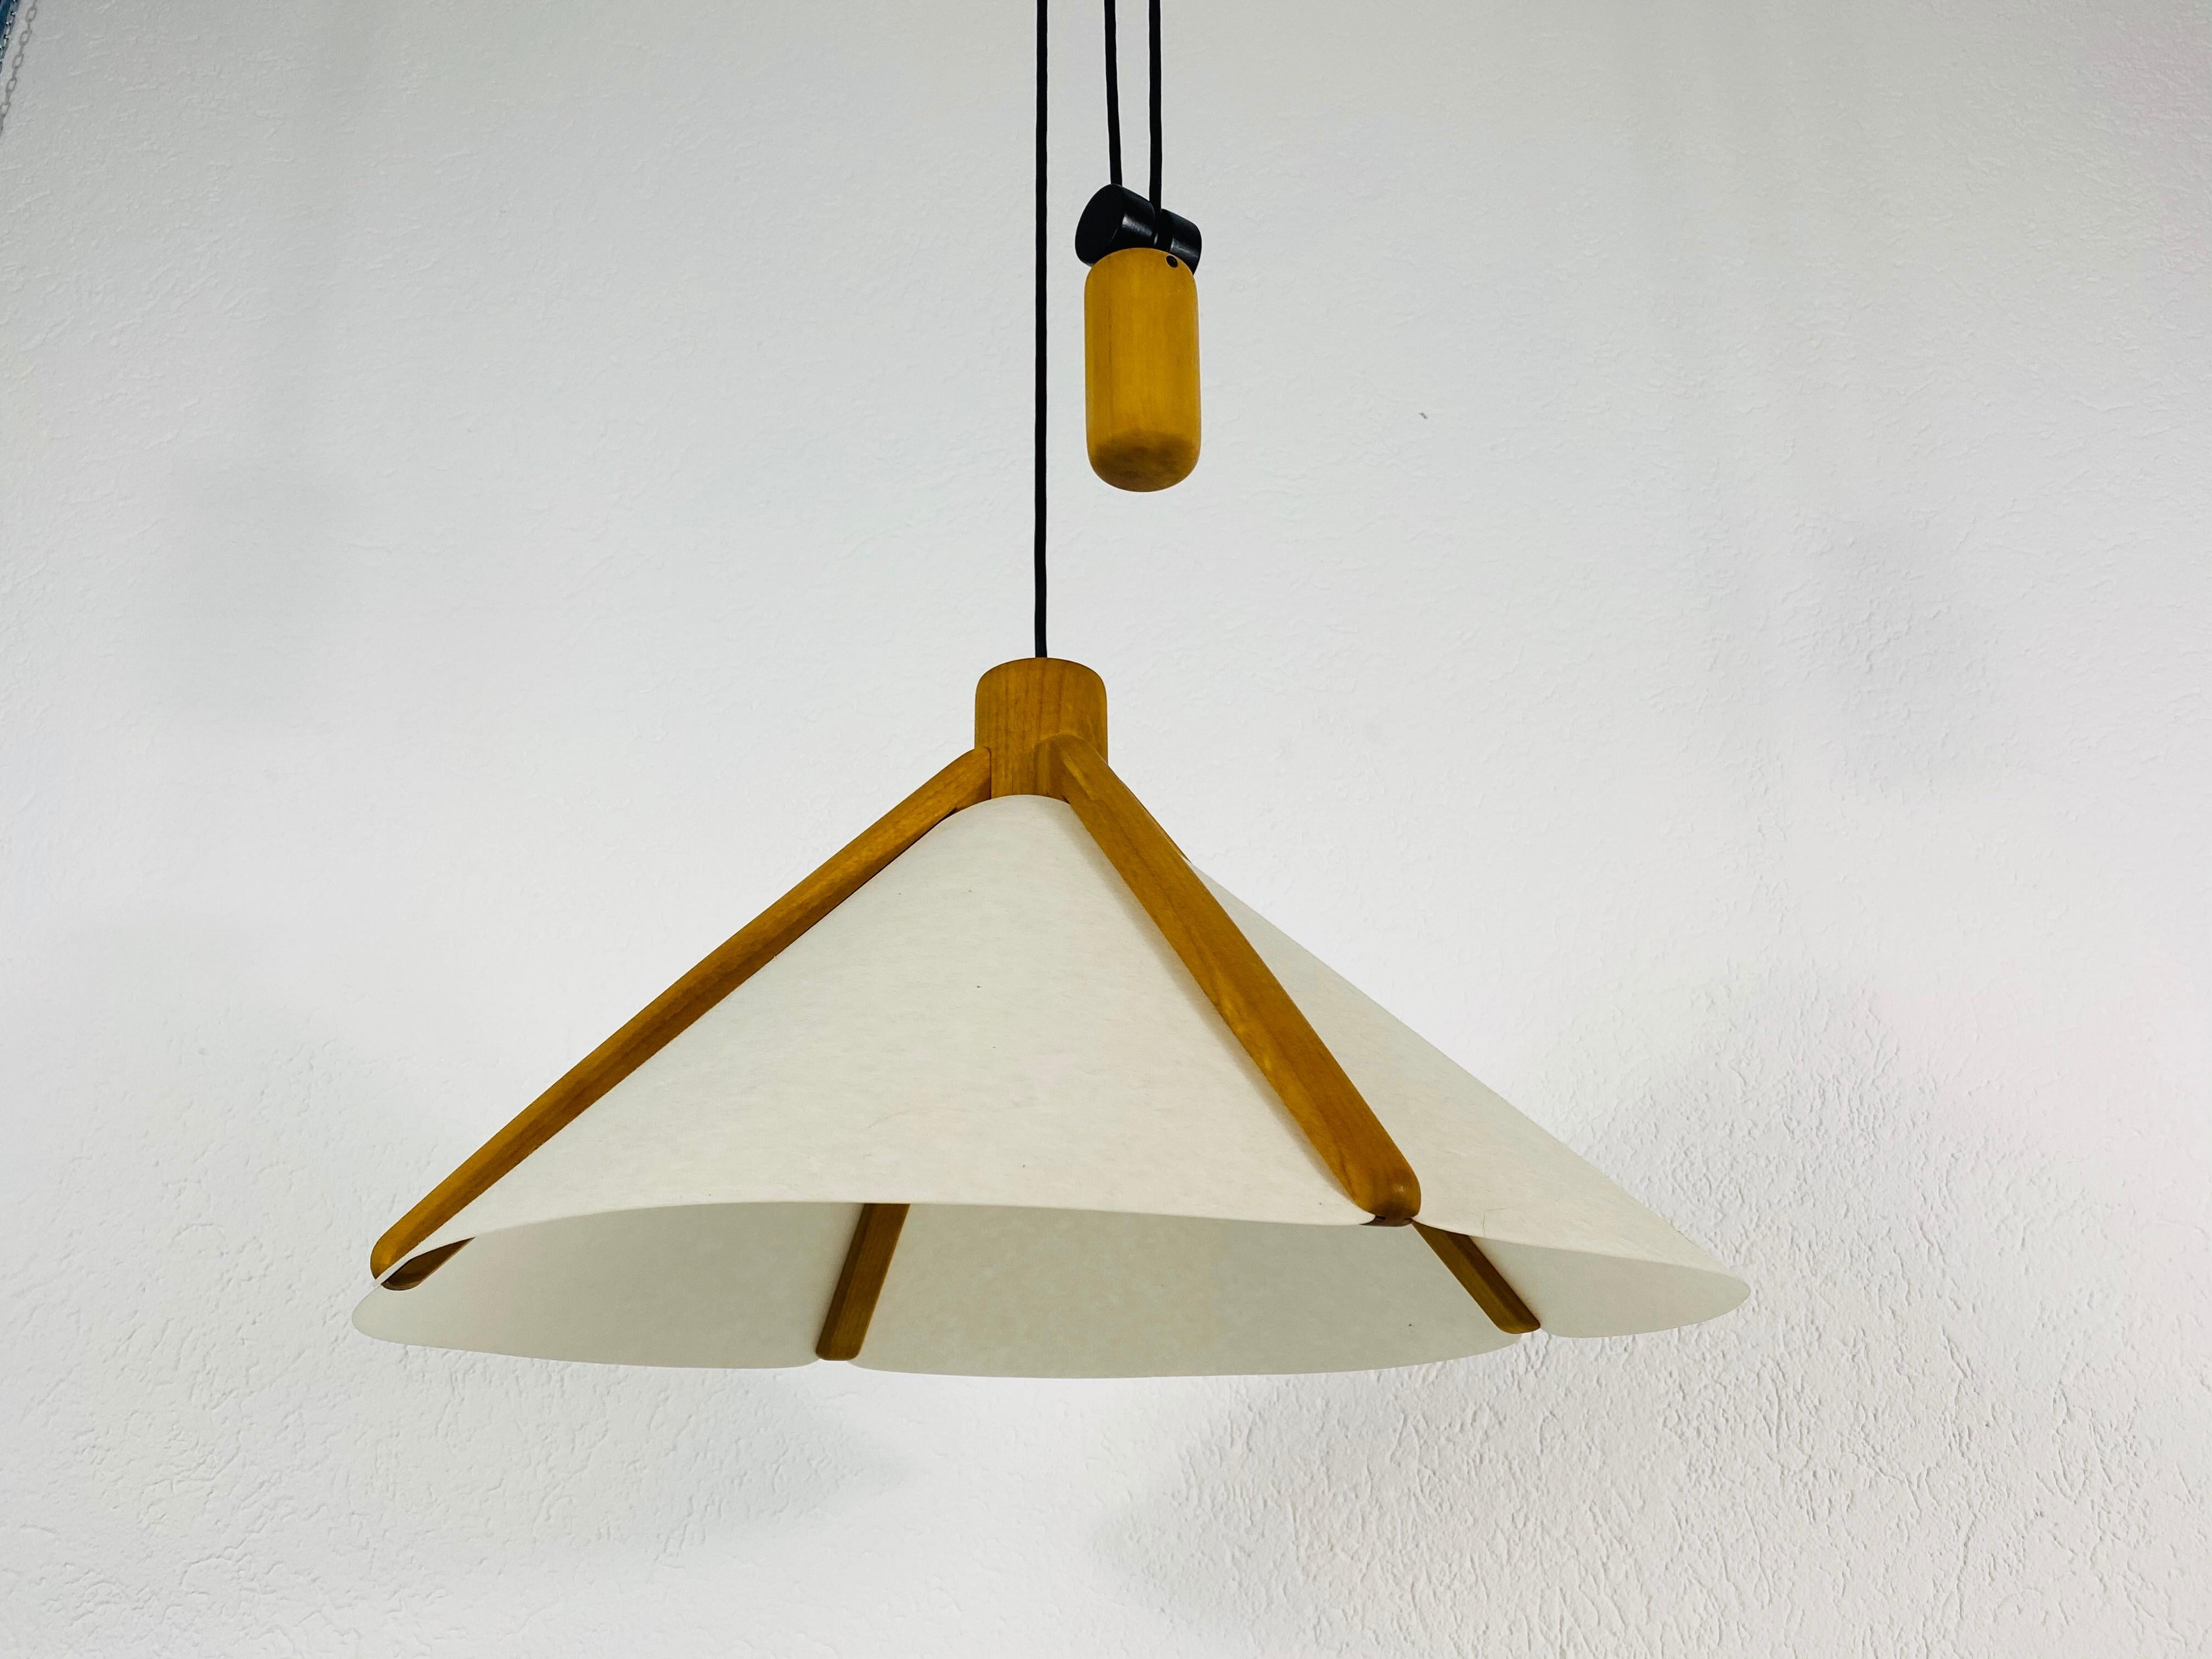 A wooden pendant lamp by Domus made in the 1960s. The body of the lamp is wood. The lamp has a Scandinavian design.

Measurements of the shade:
Height 27-100 cm
Diameter 49 cm

The light requires an E27 light bulb. Very good vintage